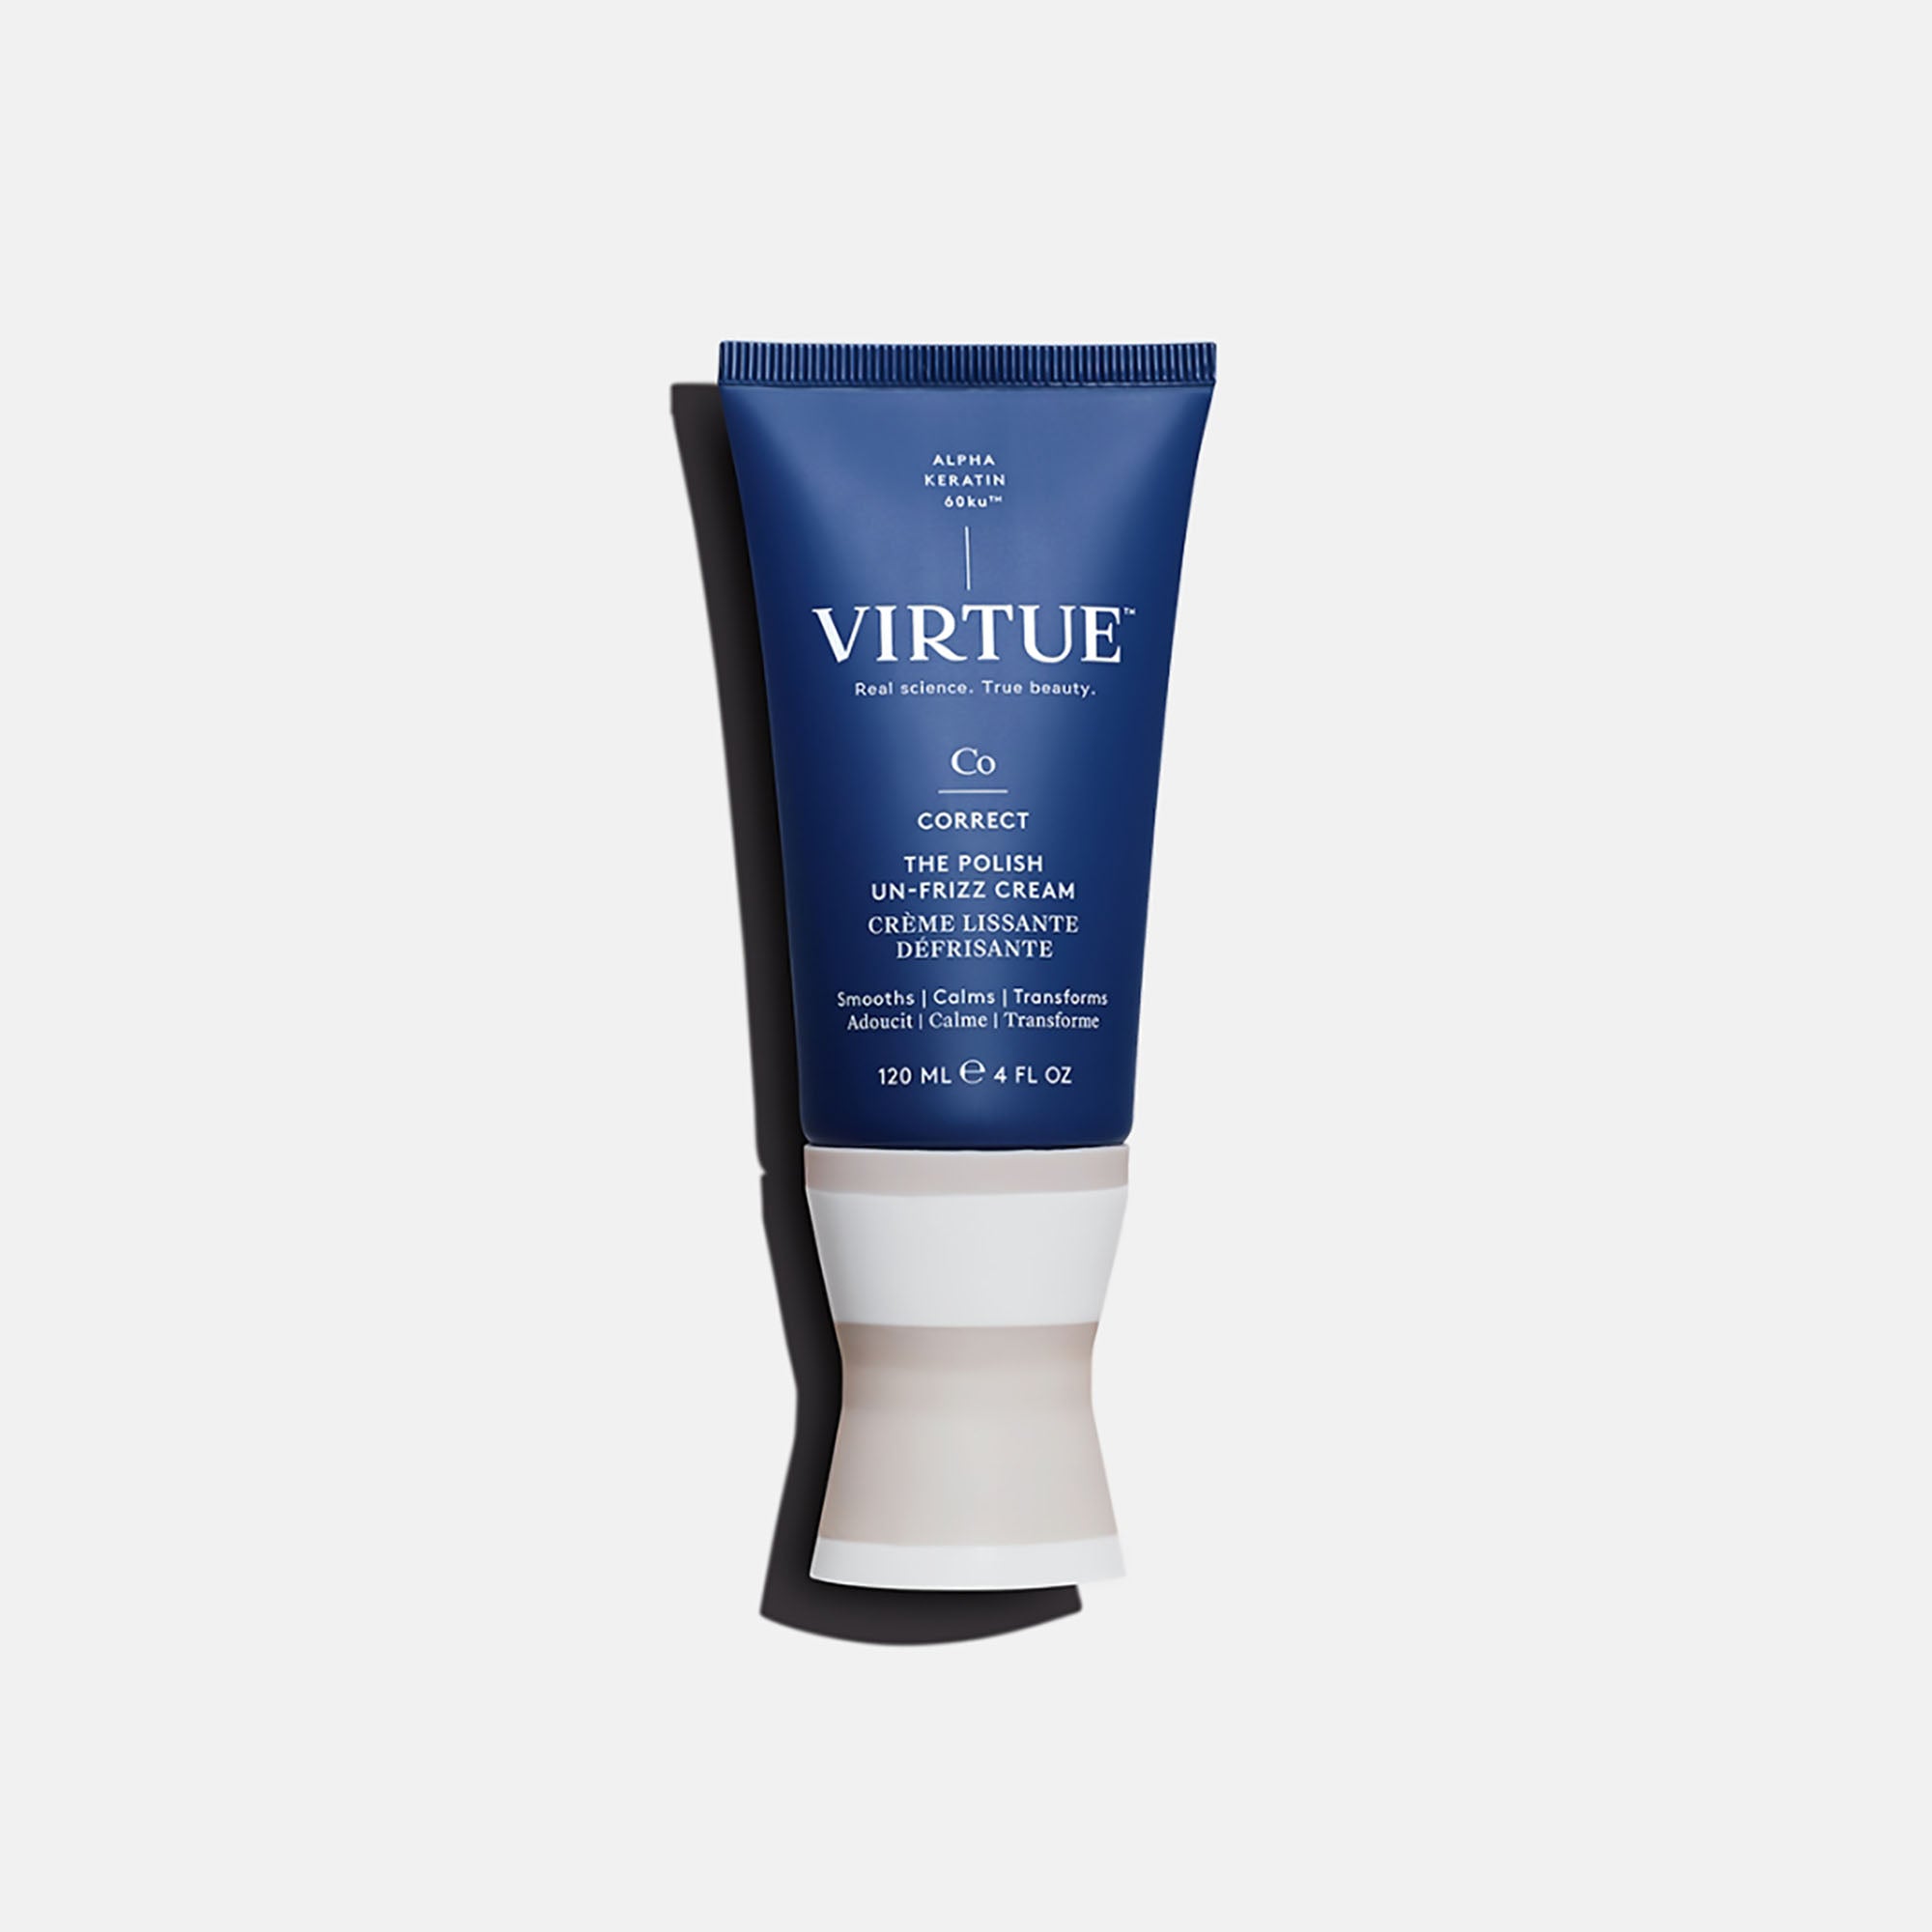 Virtue Un-Frizz Hair Styling & Smoothing Cream / 4OZ